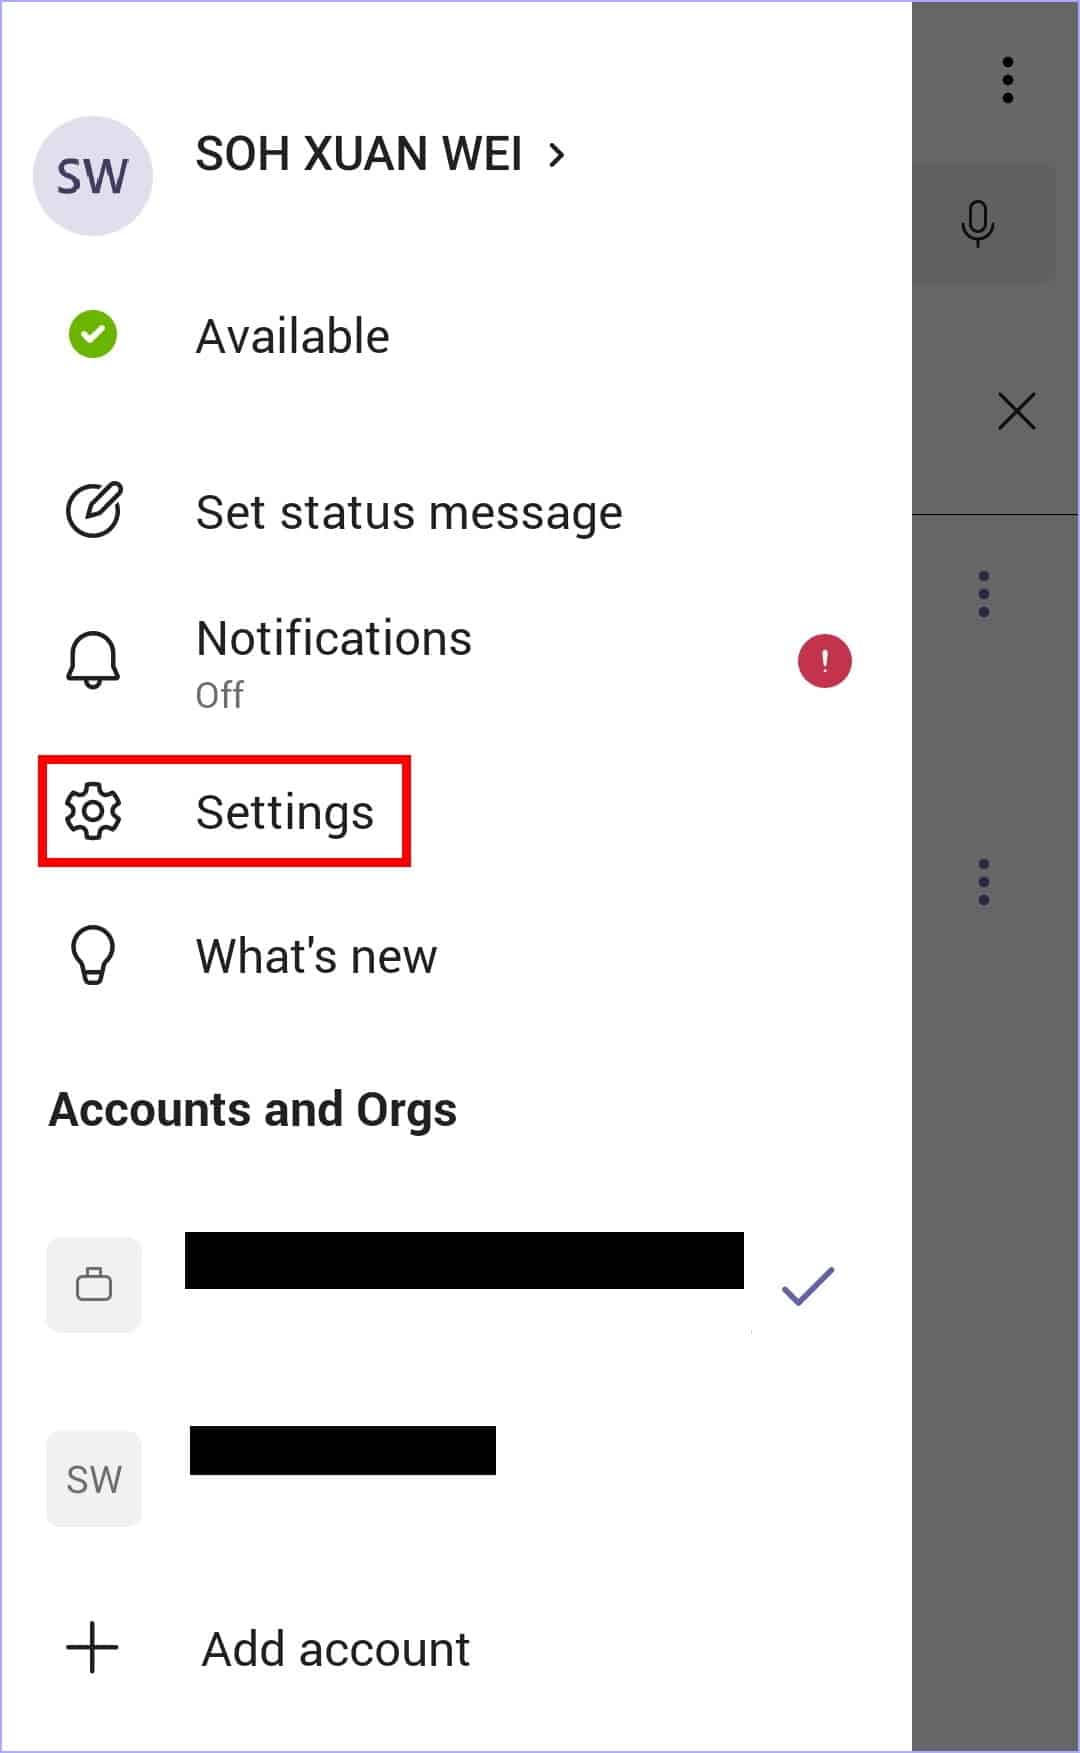 access settings menu on Microsoft Teams app to sign out and sign back into the app and fix mobile notifications not working or showing on iOS or Android